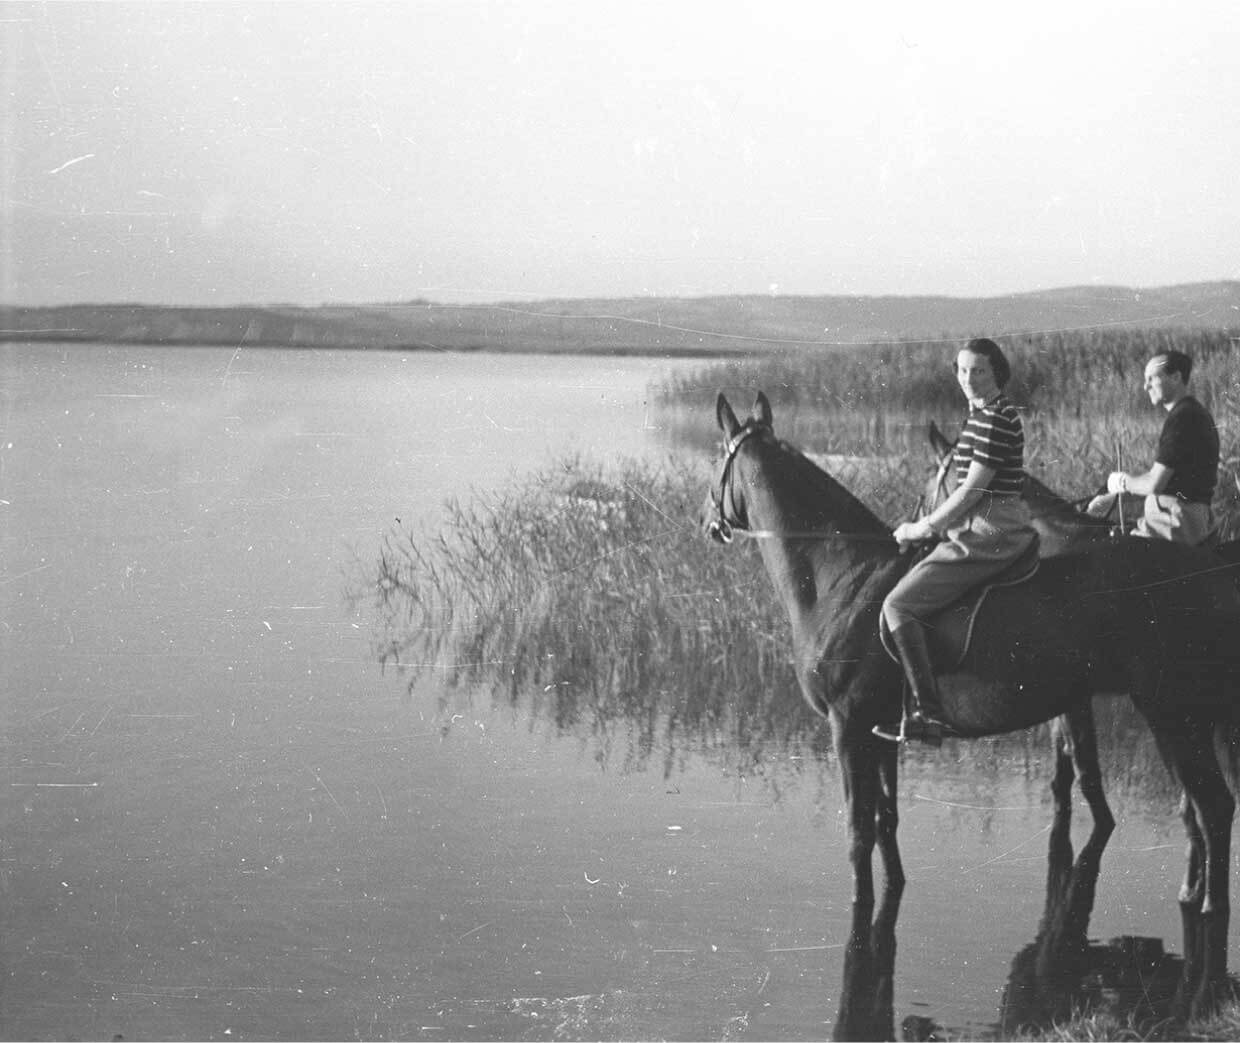 Woman and man on horses by swampy lake